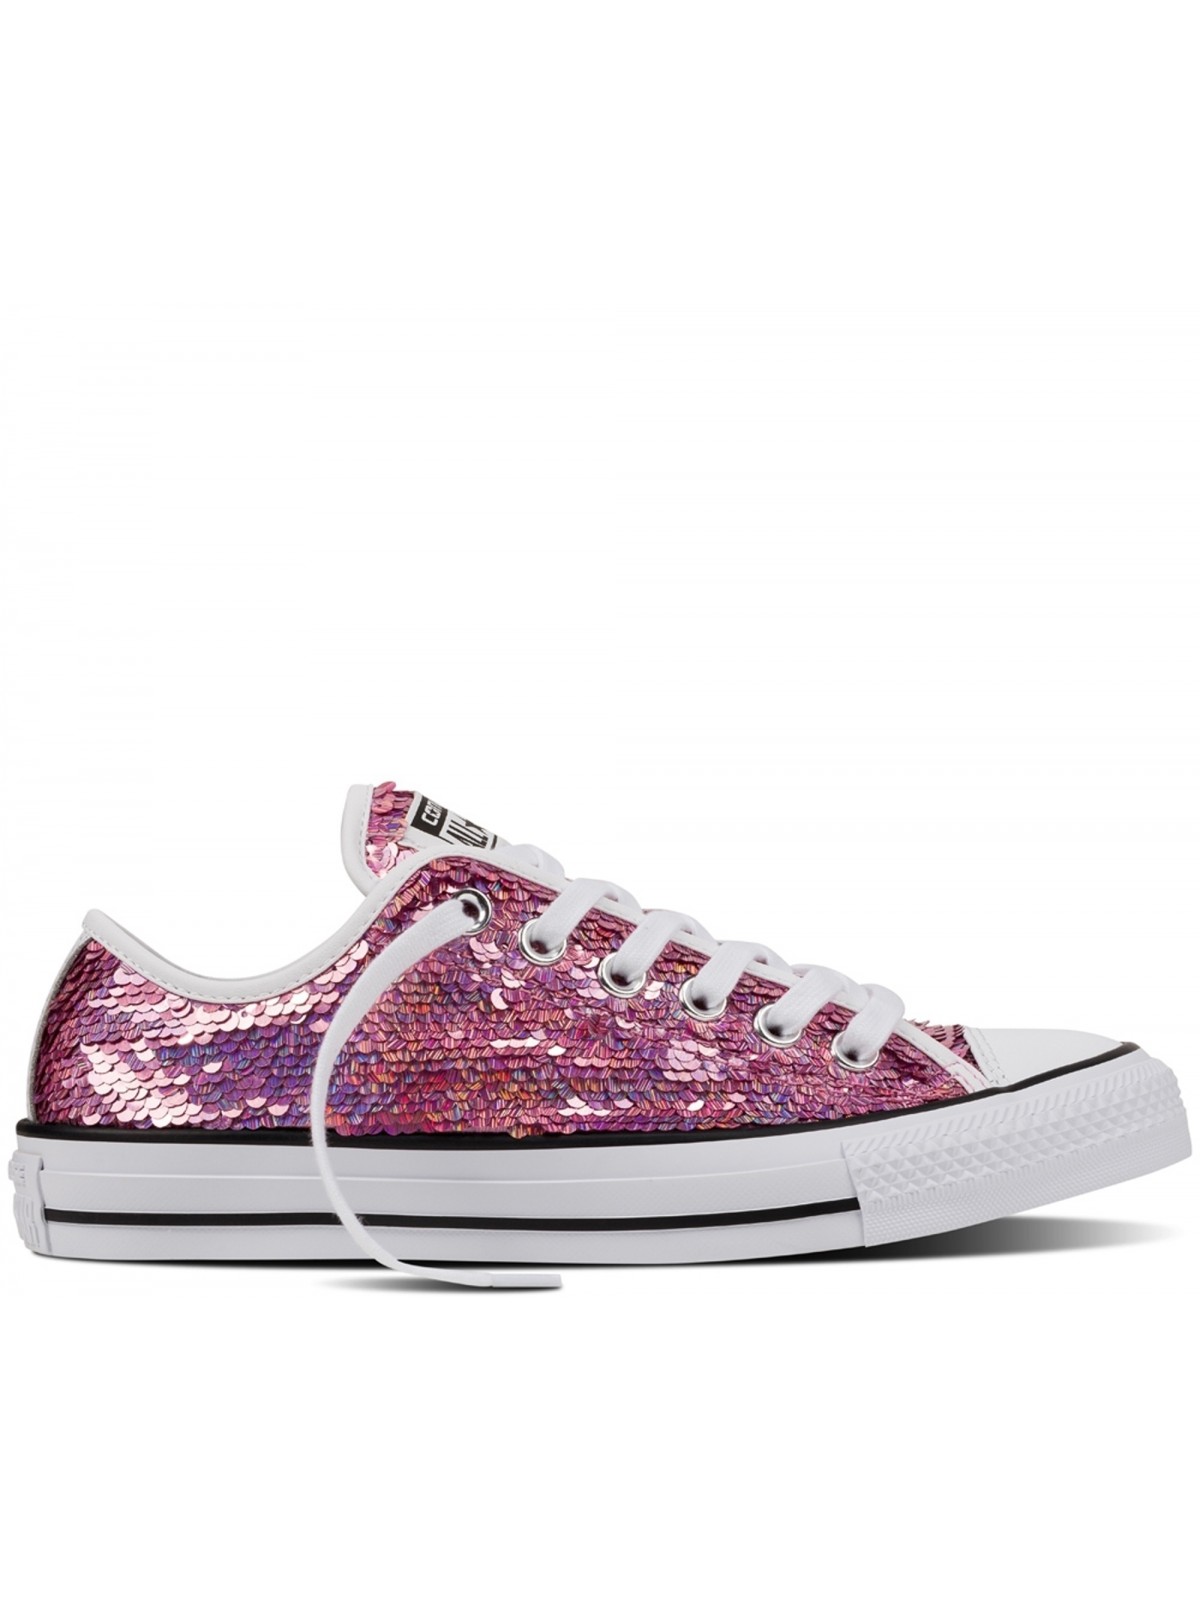 Converse Chuck Taylor all star basse sequin rose